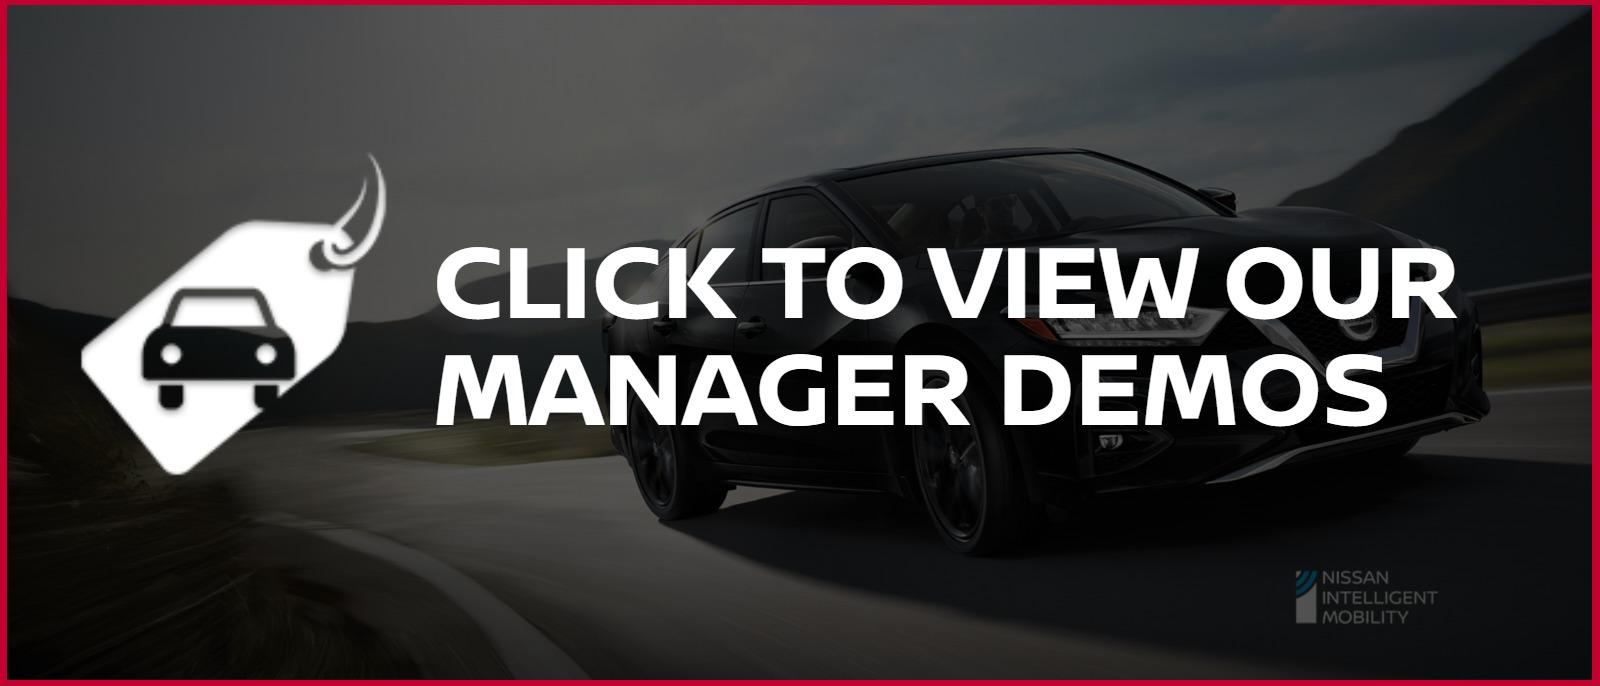 Click to View Our Manager Demos